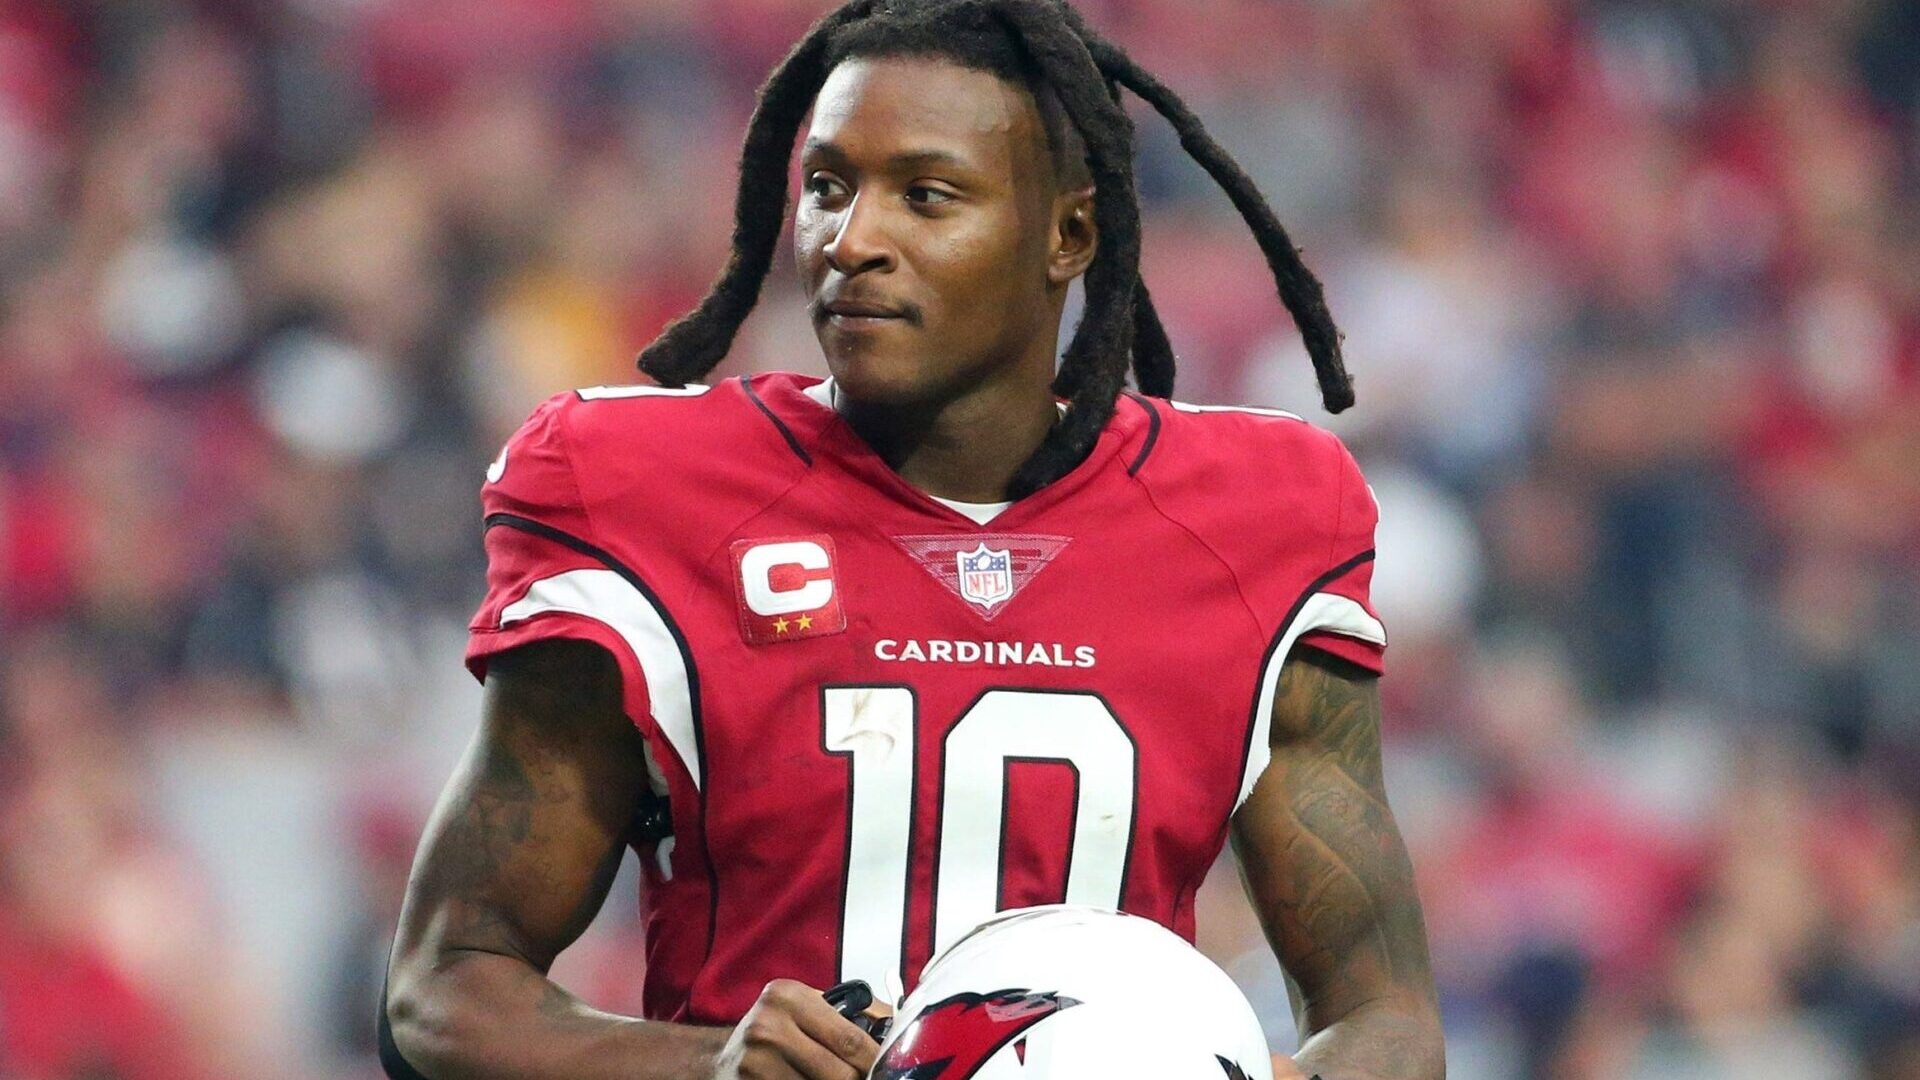 How Much Does DeAndre Hopkins Have Left in Tank?